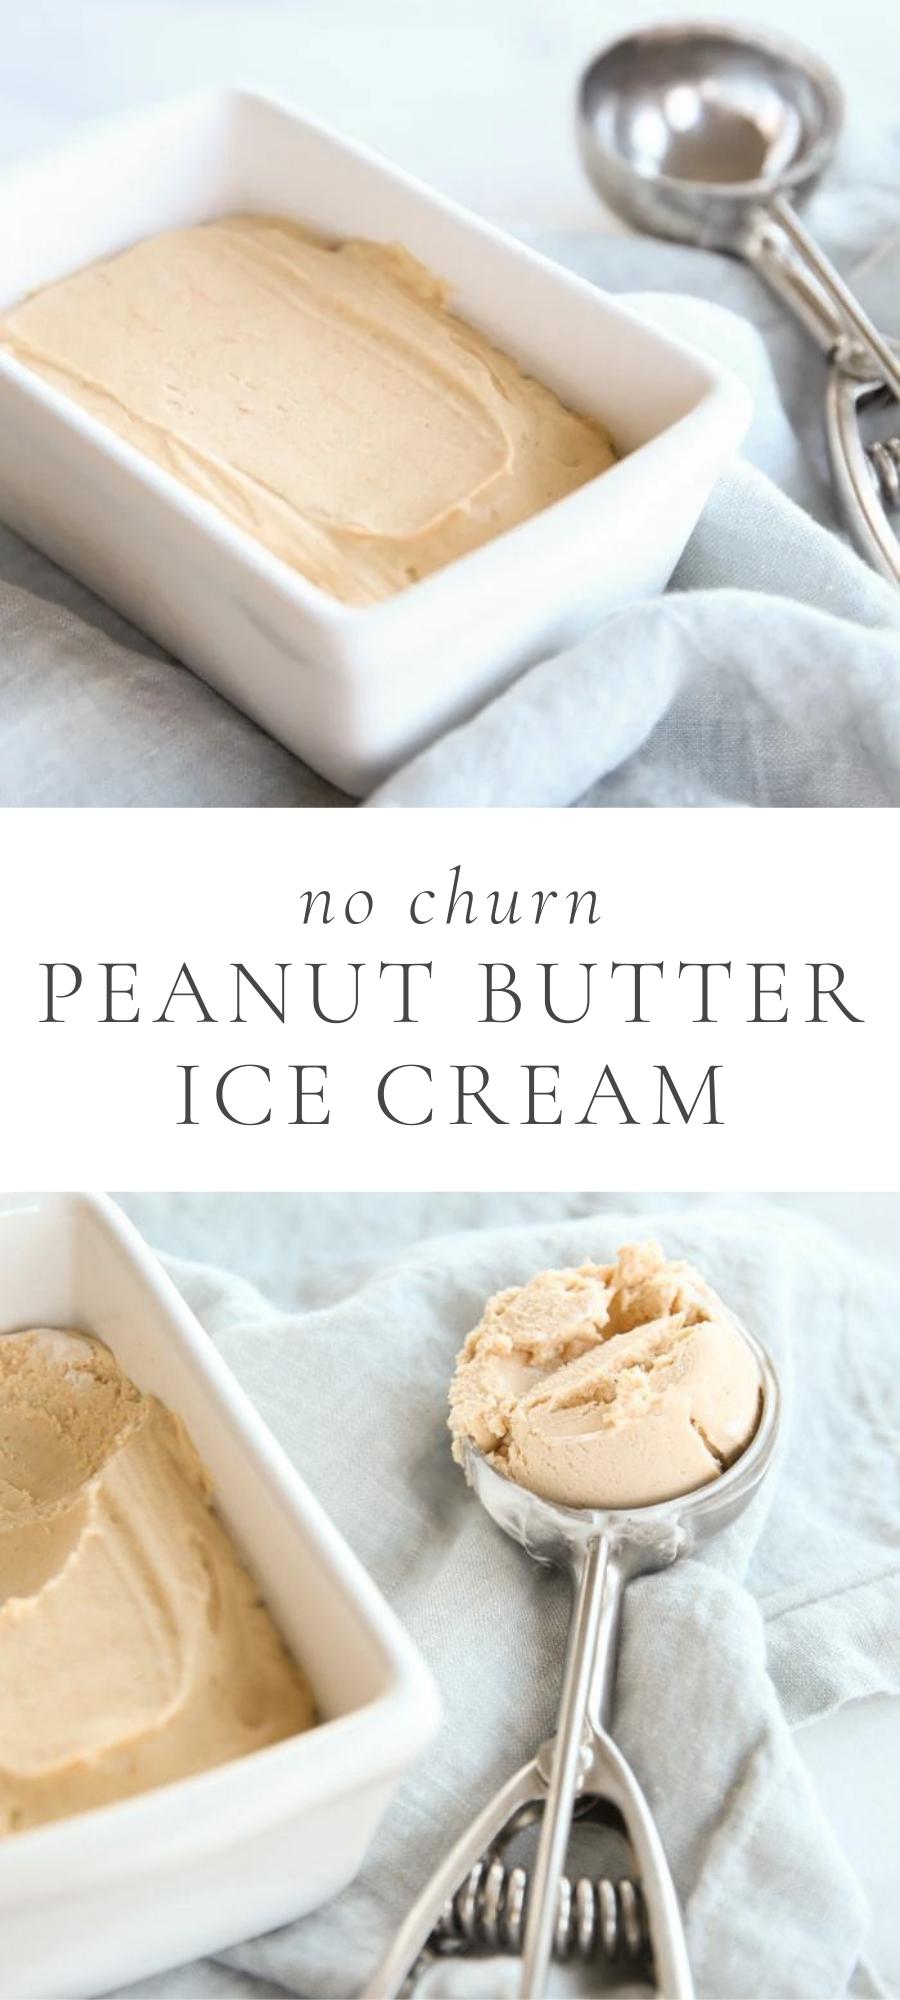 peanut butter ice cream in white baking dish next to scoop spoon and blue napkin